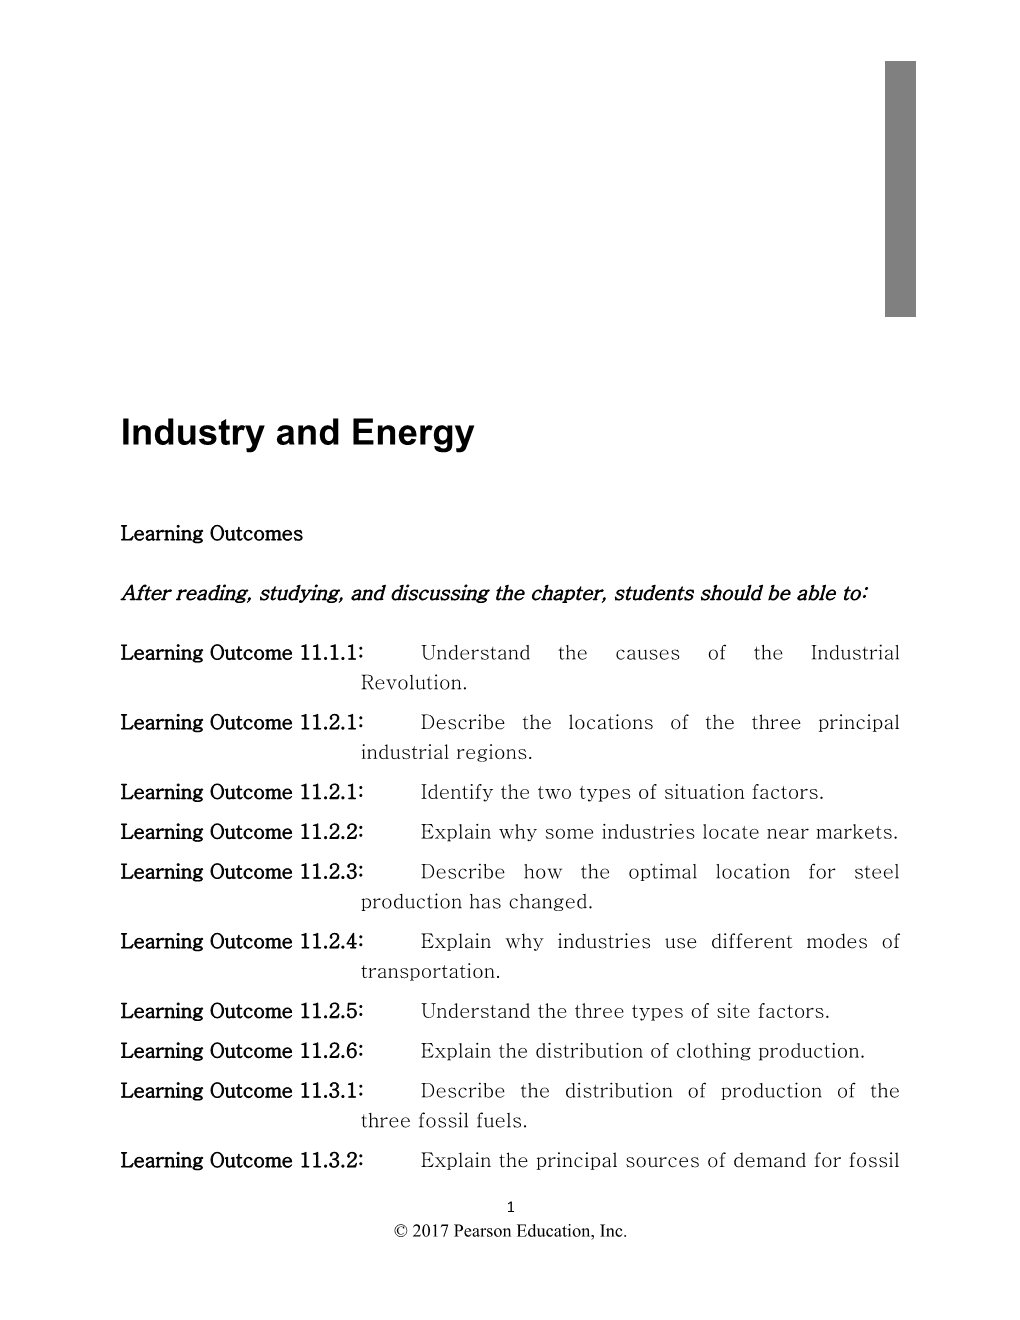 Chapter 11: Industry and Energy